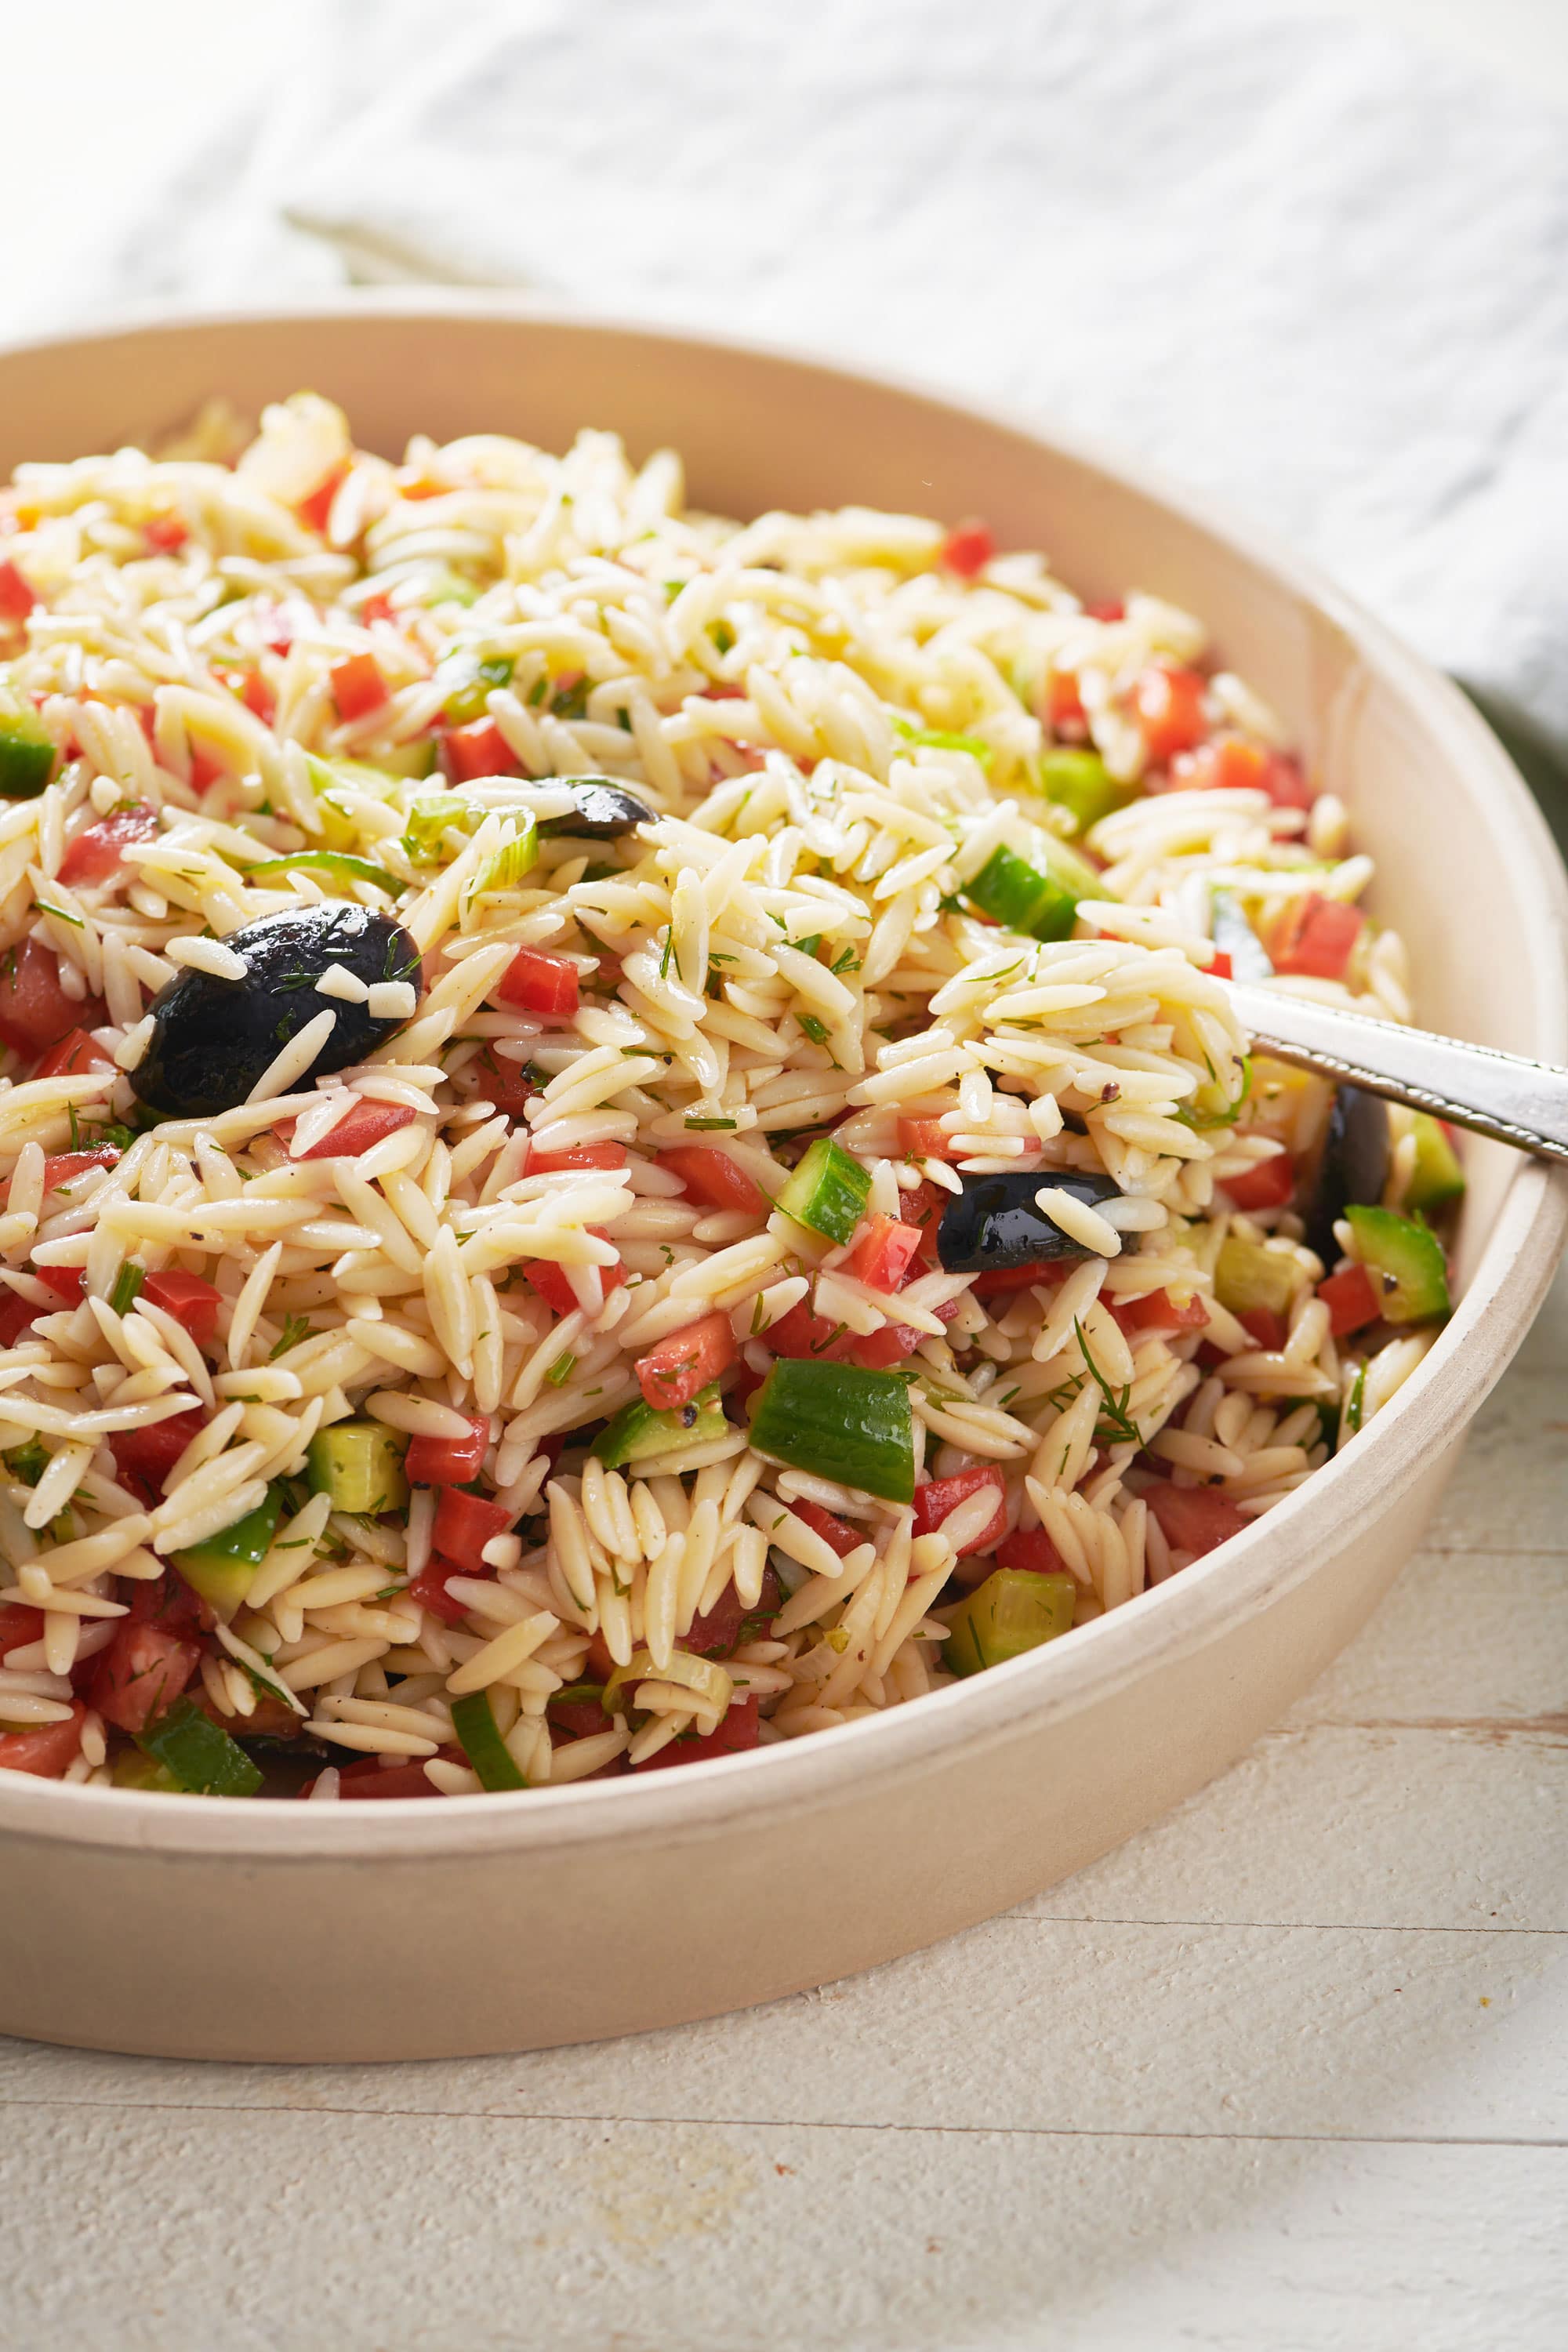 Spoon in a bowl of Greek Orzo Salad.